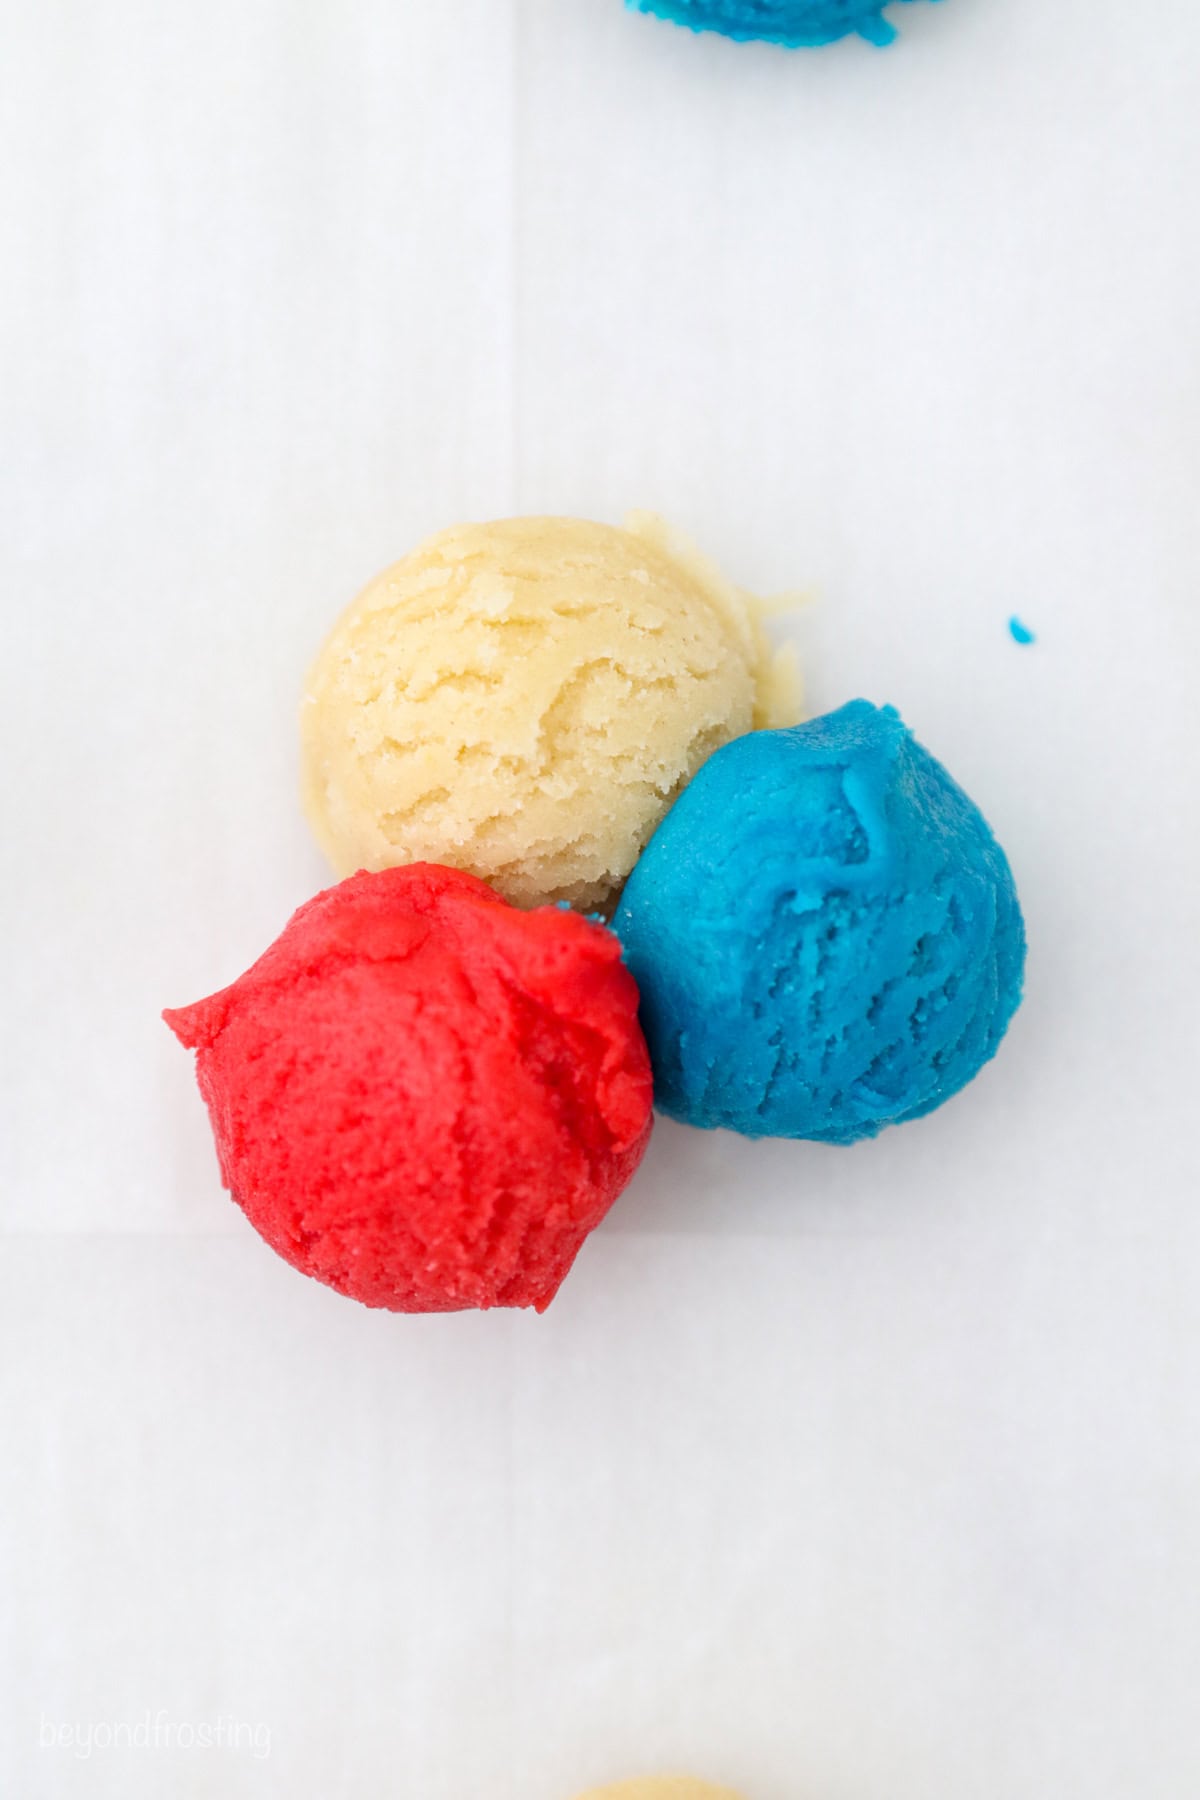 Three small scoops of red, white, and blue cookie dough arranged in a triangle.